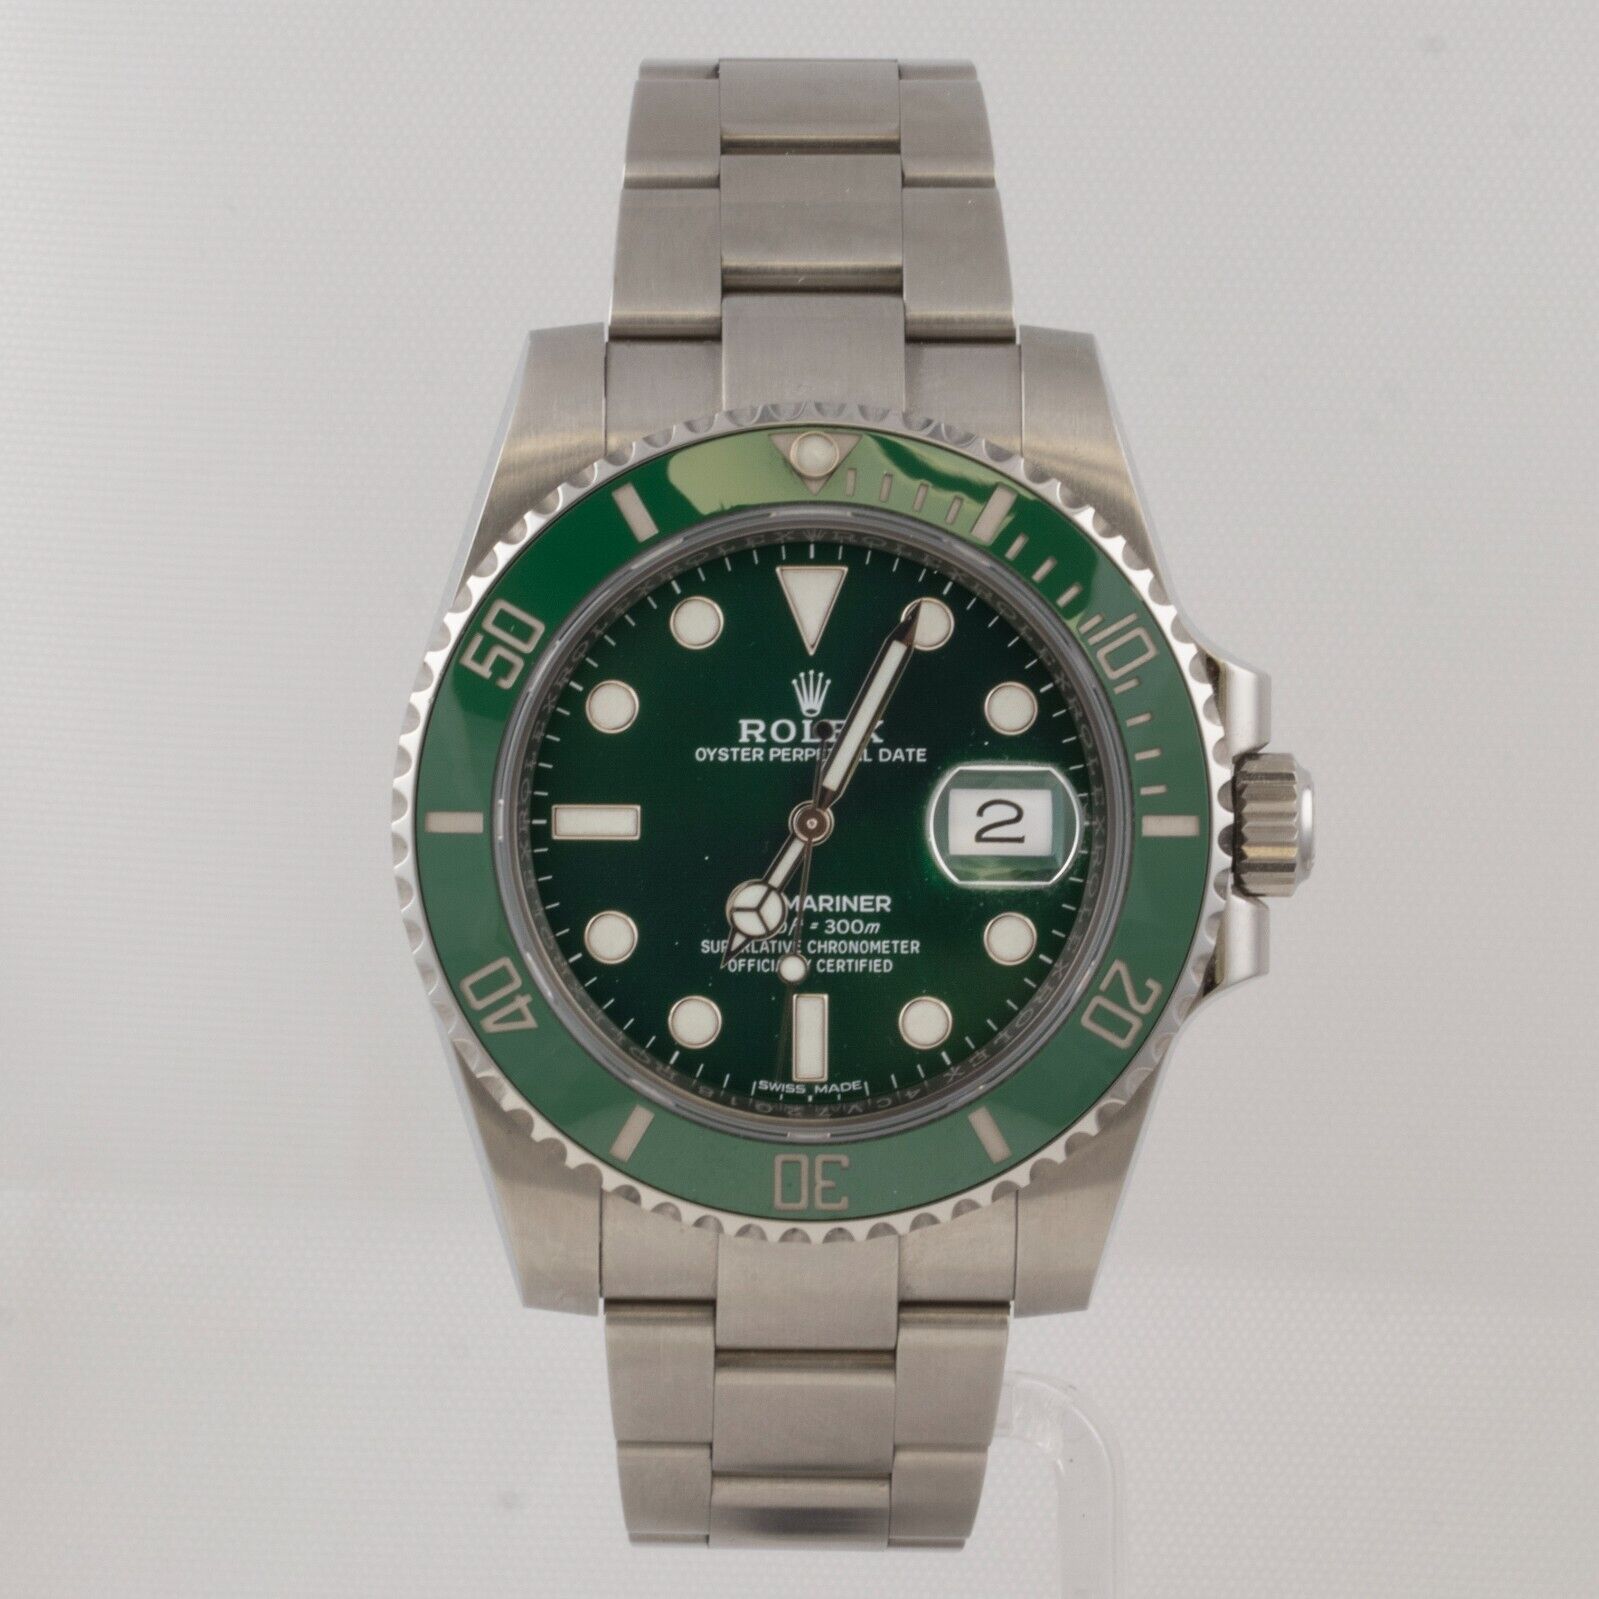 2018 Rolex Submariner HULK Green Stainless Steel 40mm Watch 116610LV BOX PAPERS